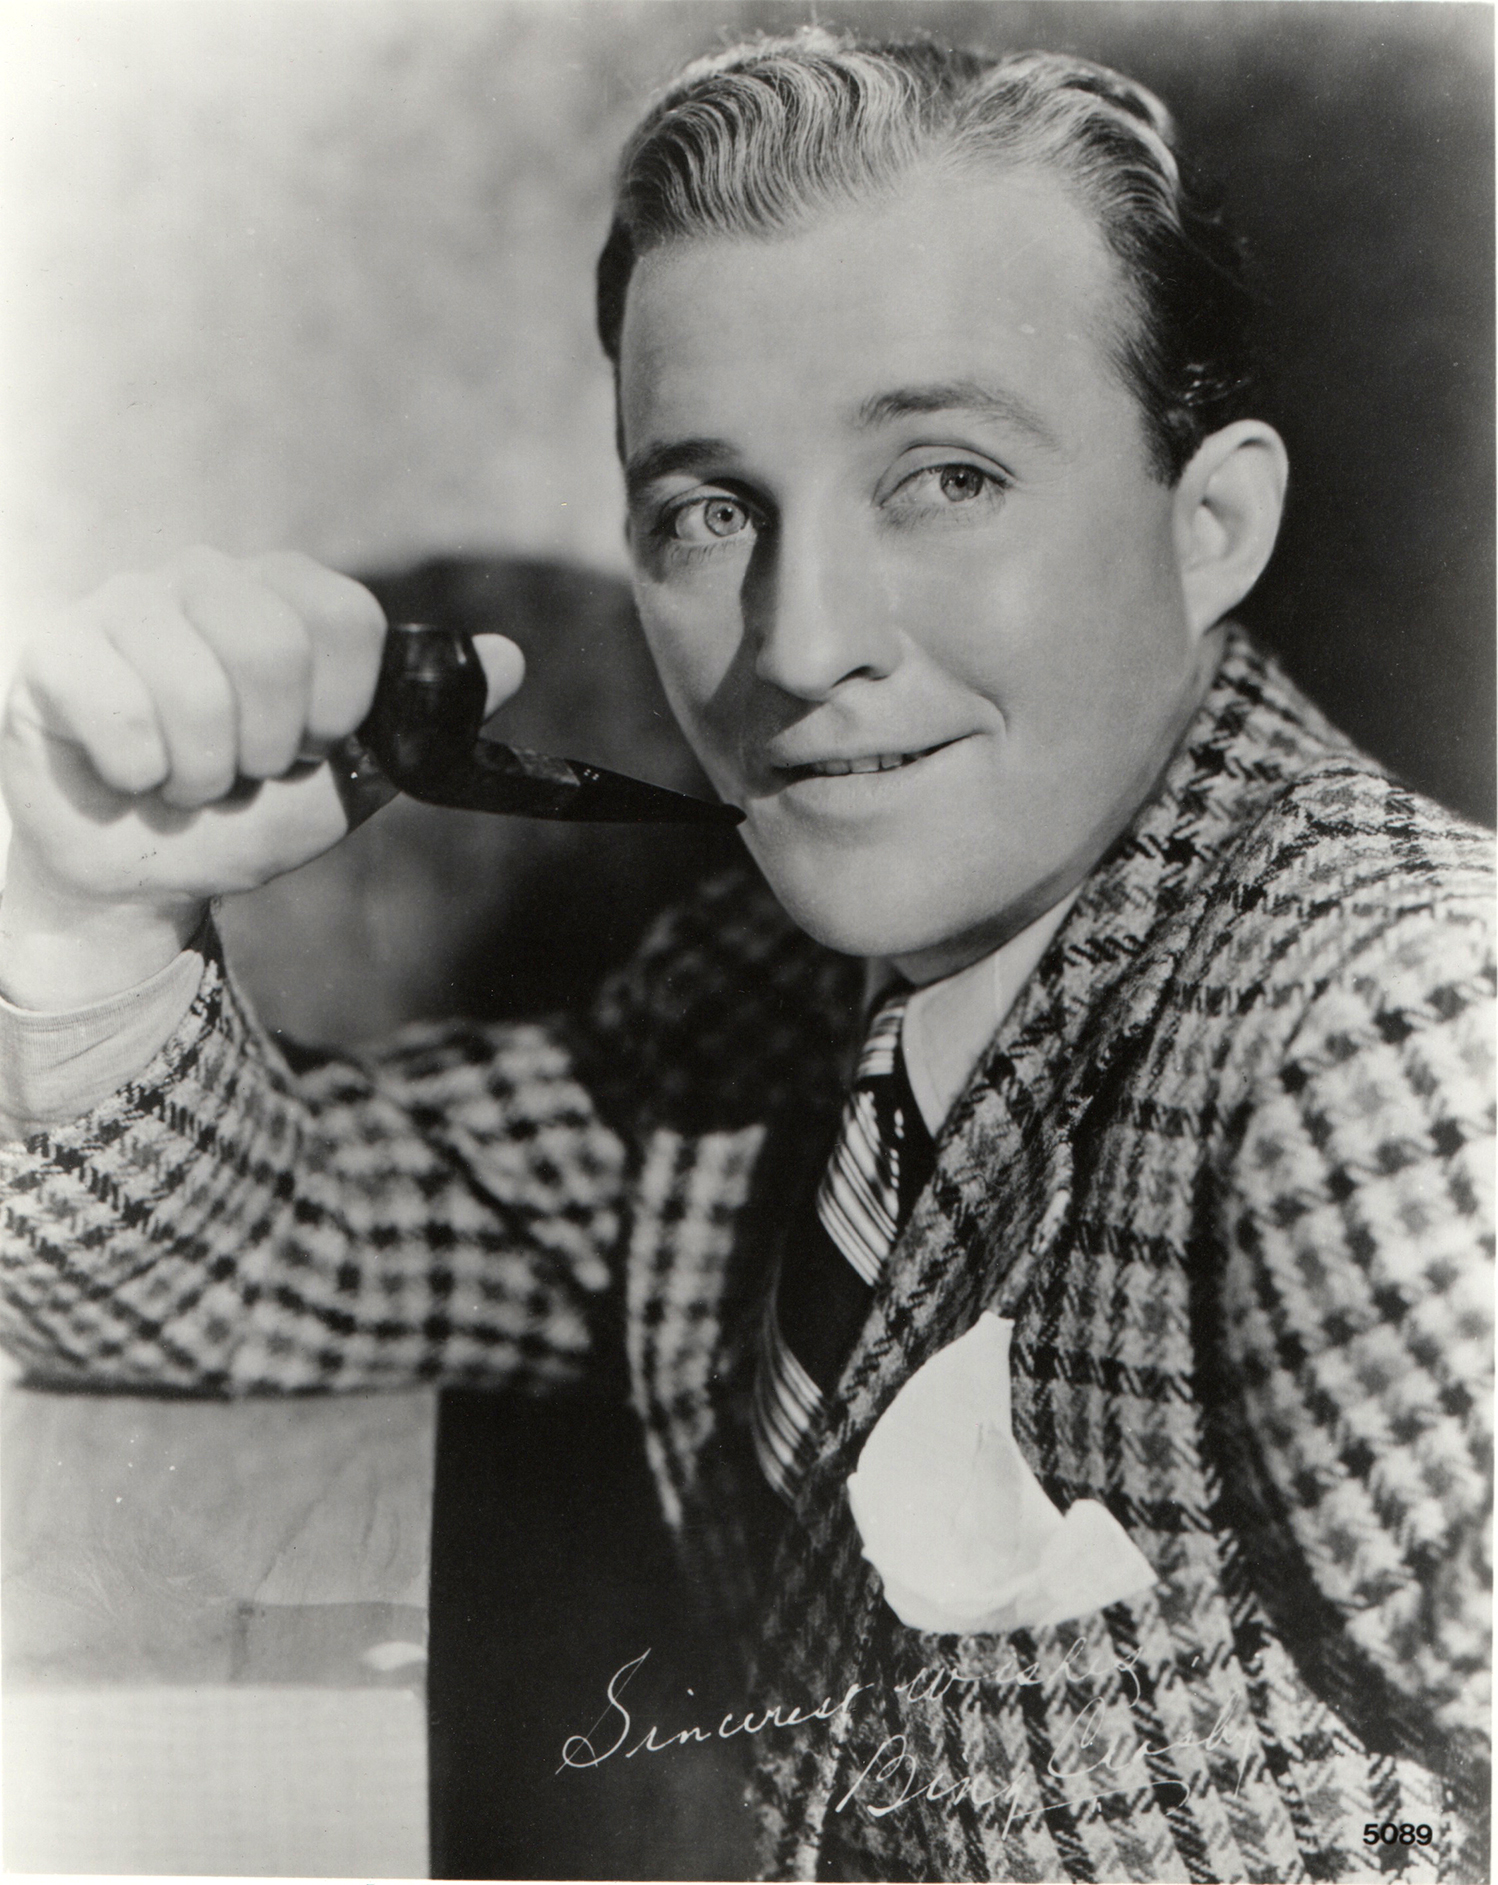 Tacoma-borned Bing Crosby had a golden voice, but he also knew how to make the industry work for him.